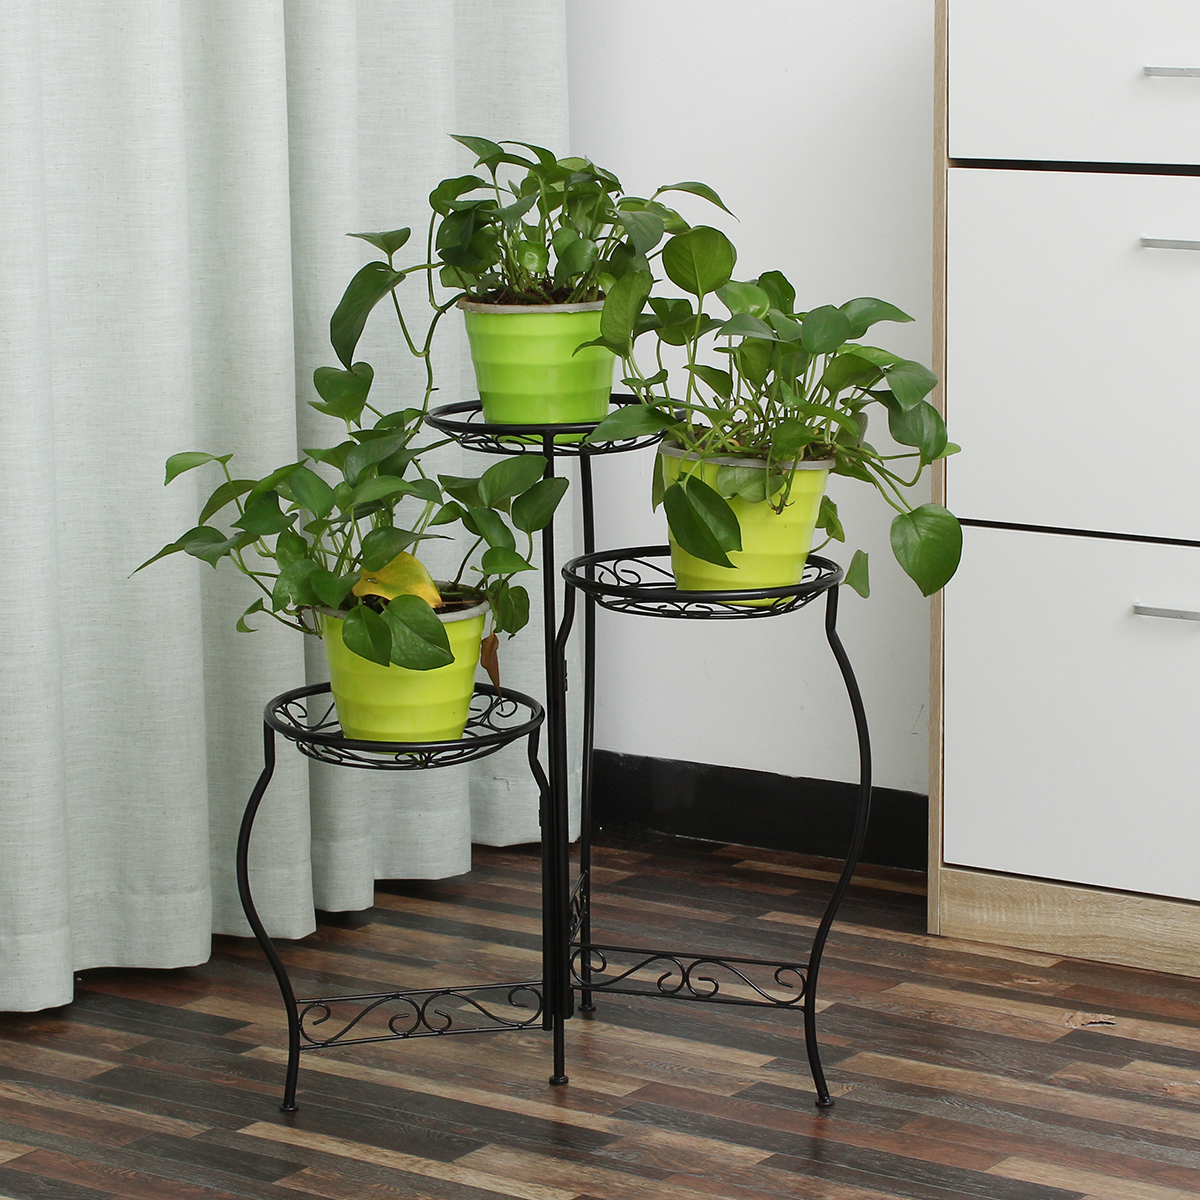 Metal-Flower-Pot-Stand-3-Tiers-Rounded-Plant--Holder-Indoor-Outdoor-Flower-Plant-Stand-Displaying-Ra-1797075-5